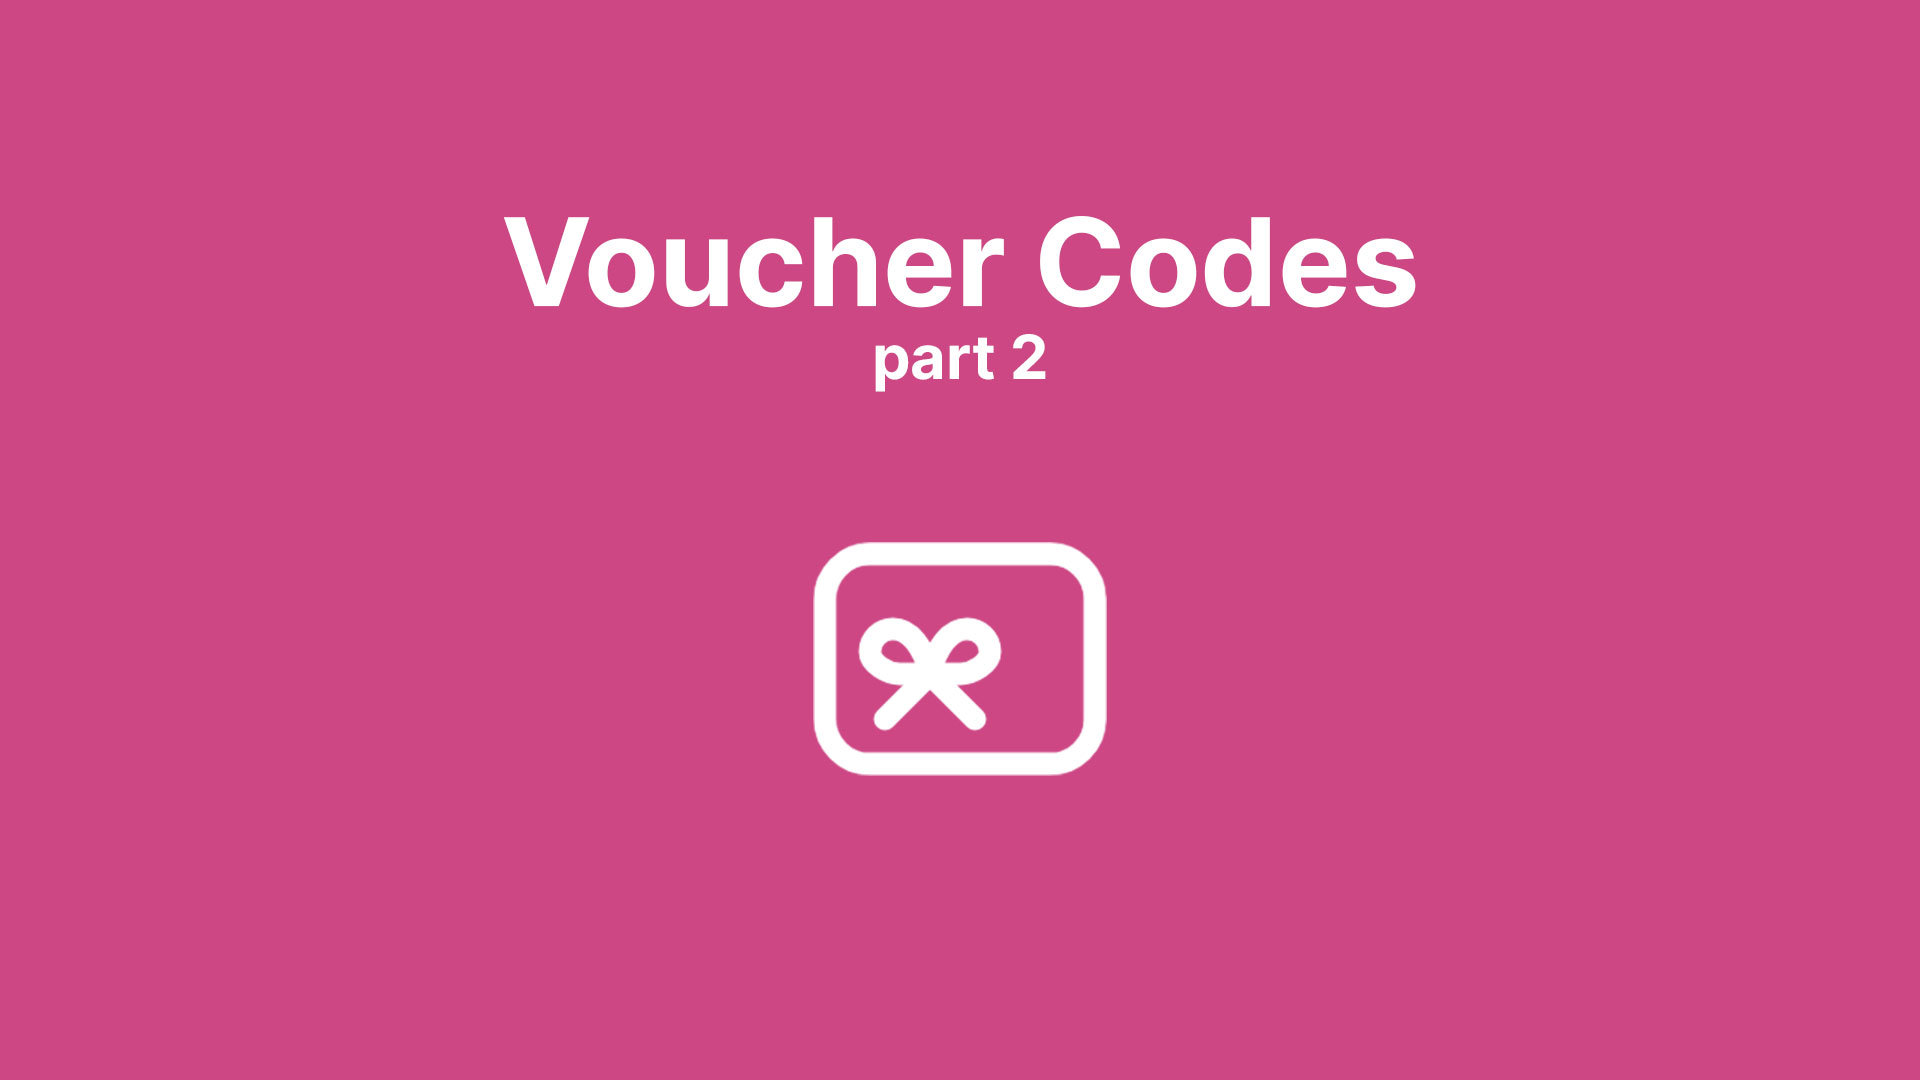 Use voucher codes in Real Time Marketing, personalize email, and launch journey for seamless execution.